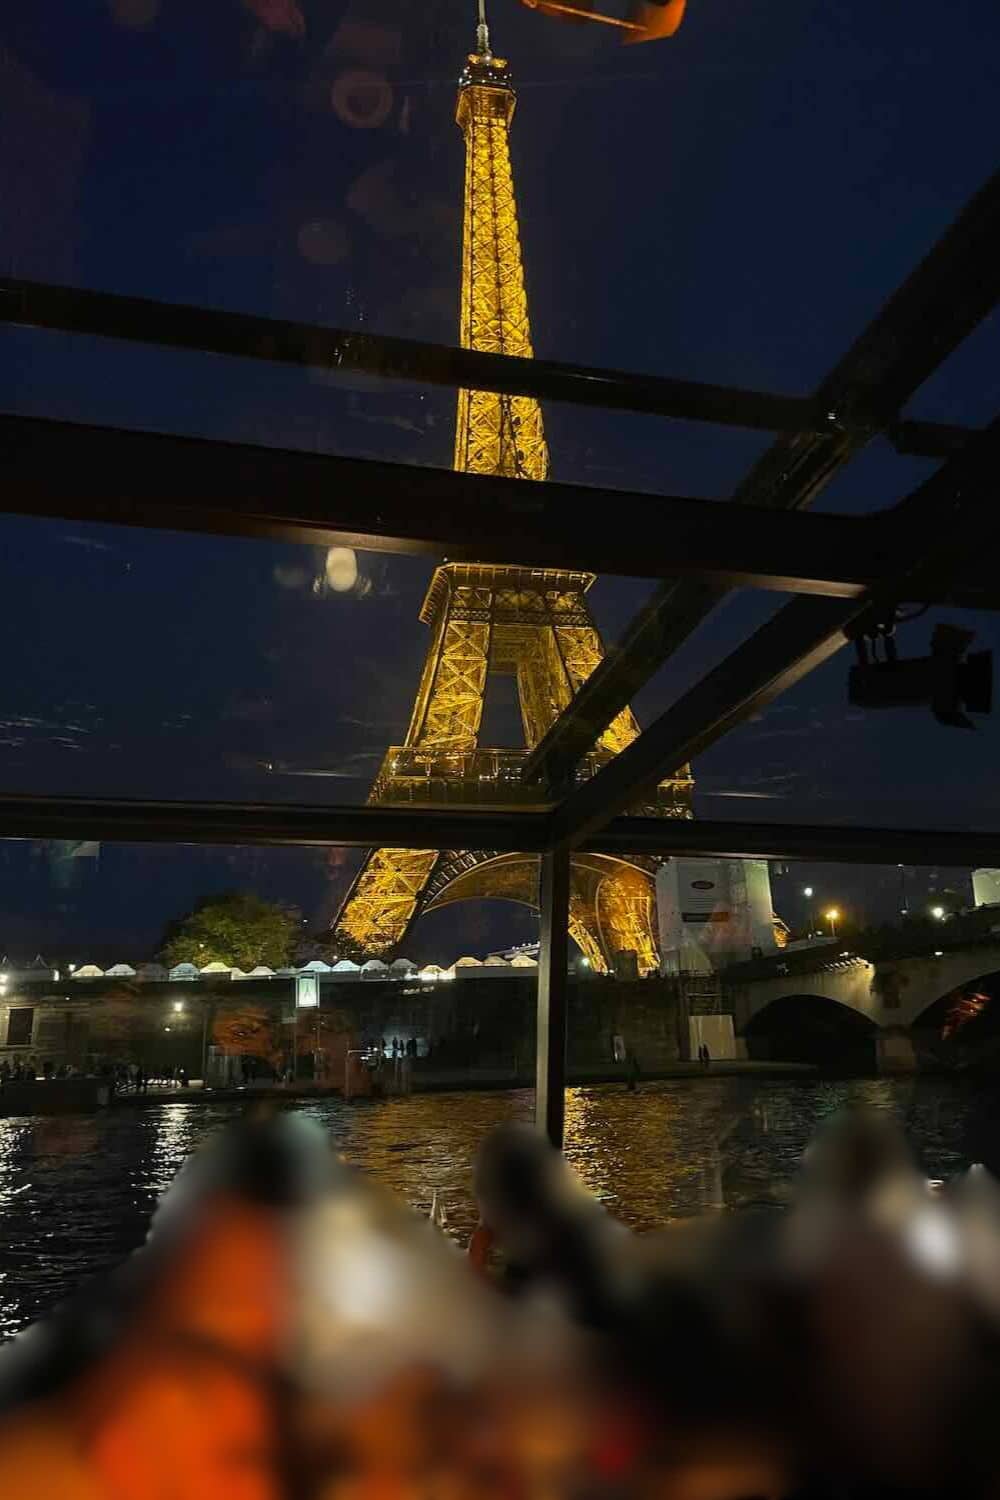 A night scene on a river cruise in Paris, with diners enjoying their meals under the illuminated Eiffel Tower visible through the glass roof, reflecting off the water for a magical dining experience.